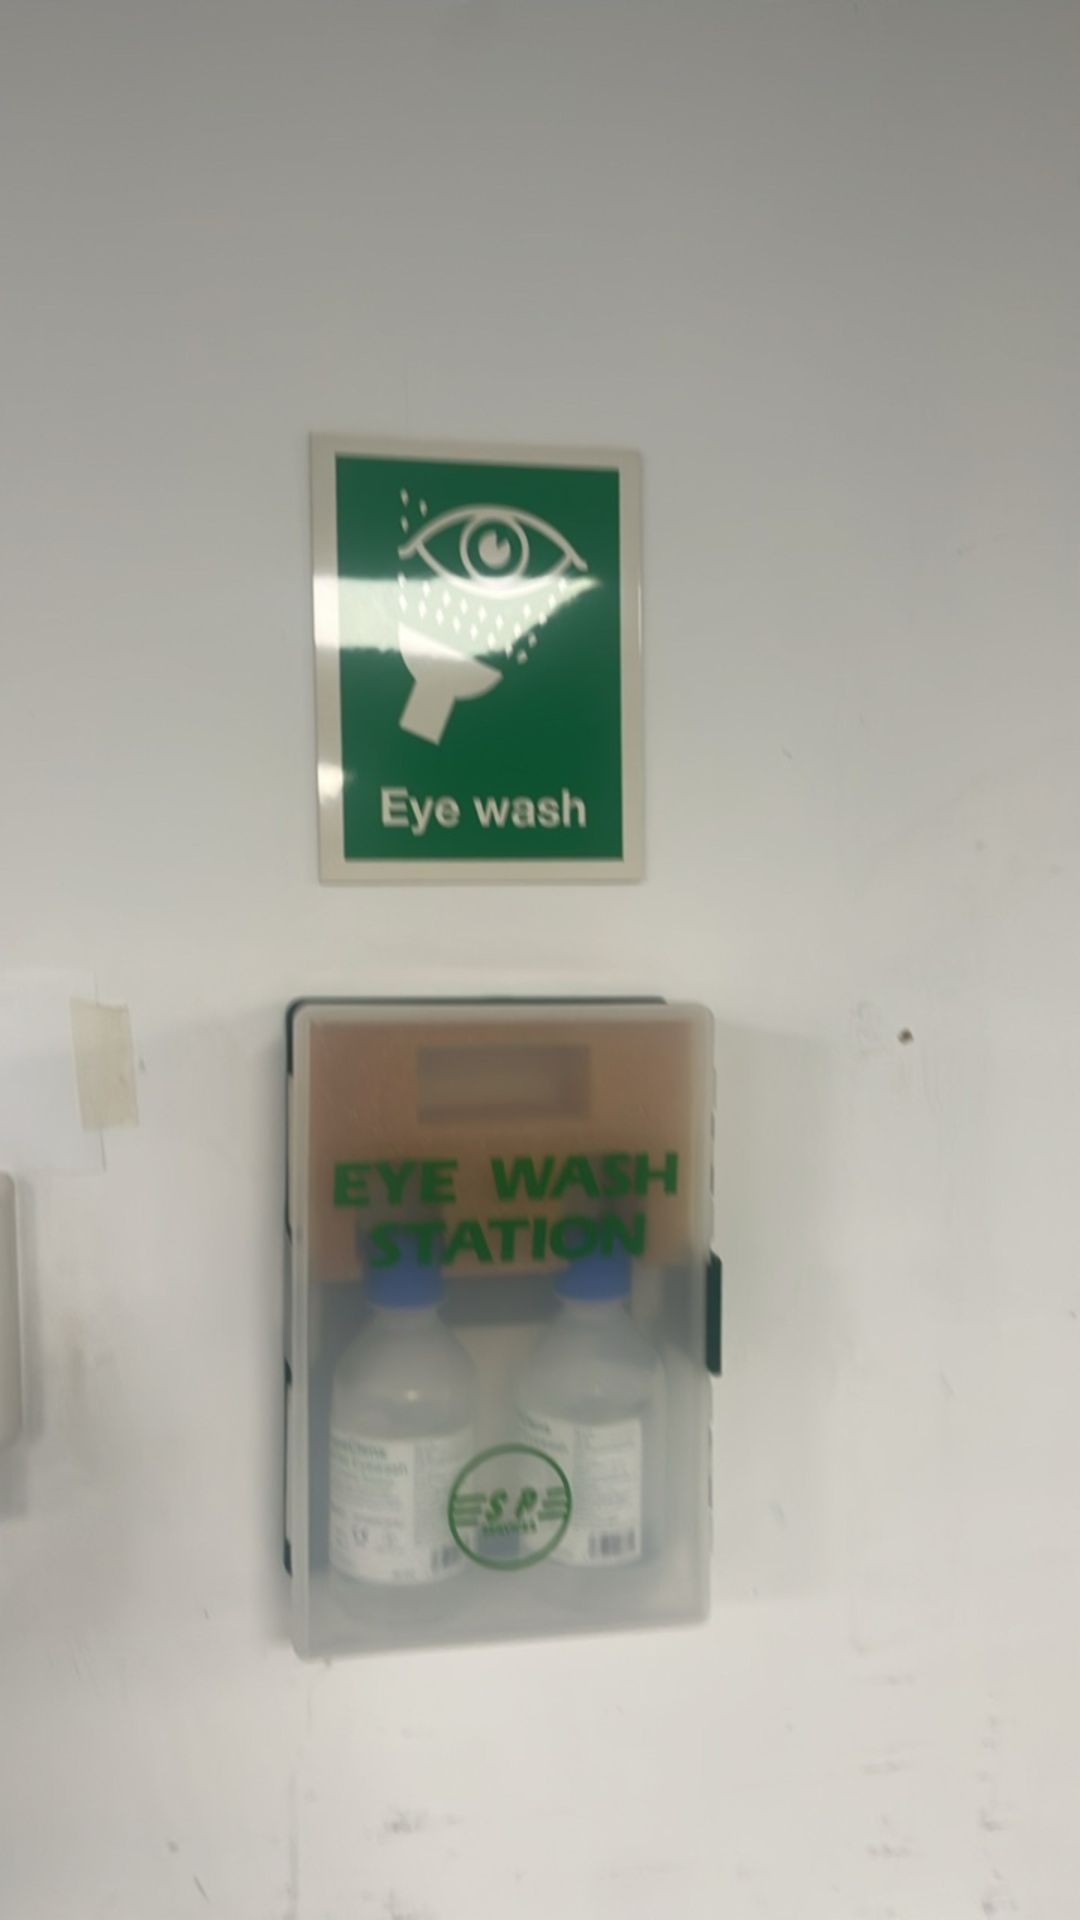 First Aid / Eye Wash Station - Image 5 of 5